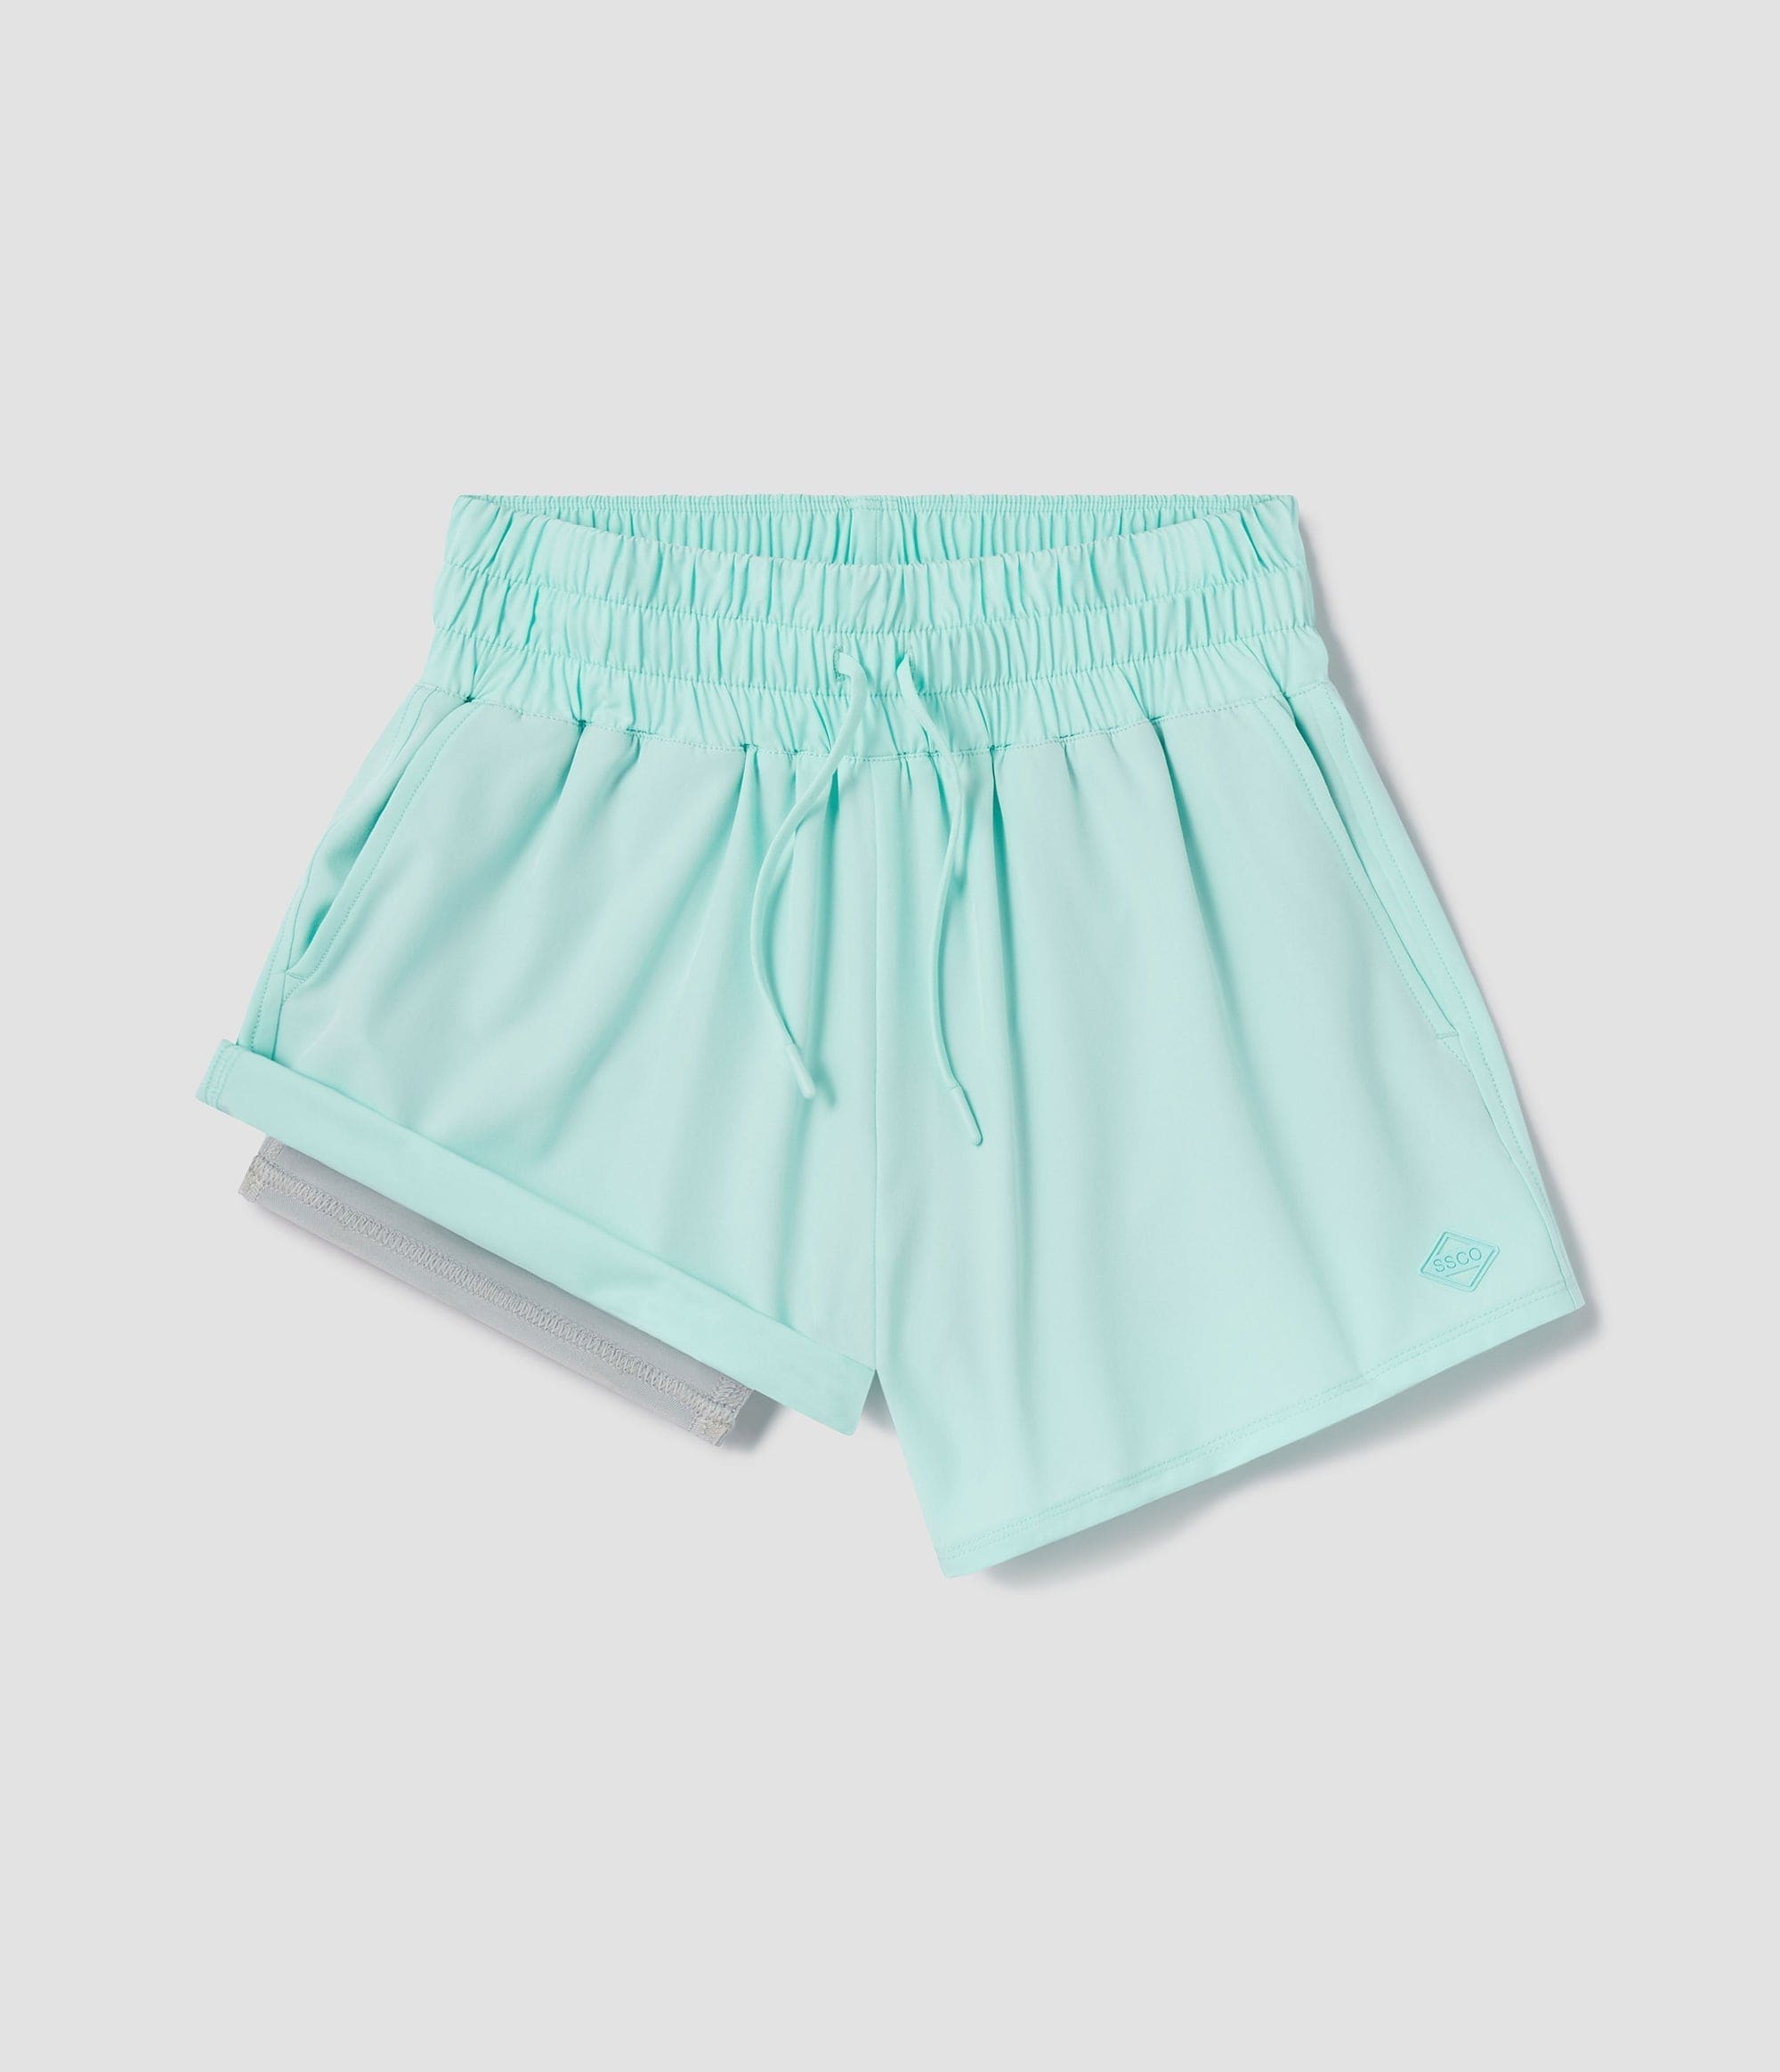 Womens Lined Hybrid Shorts - Crystal Cove